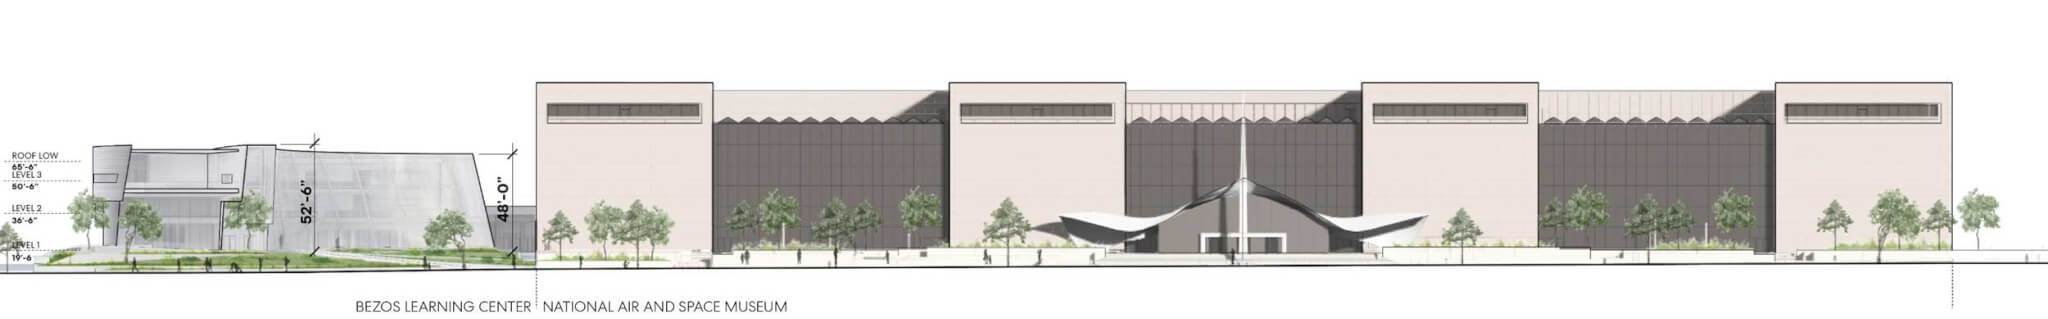 Bezos Learning Center and National Air and Space Museum elevation